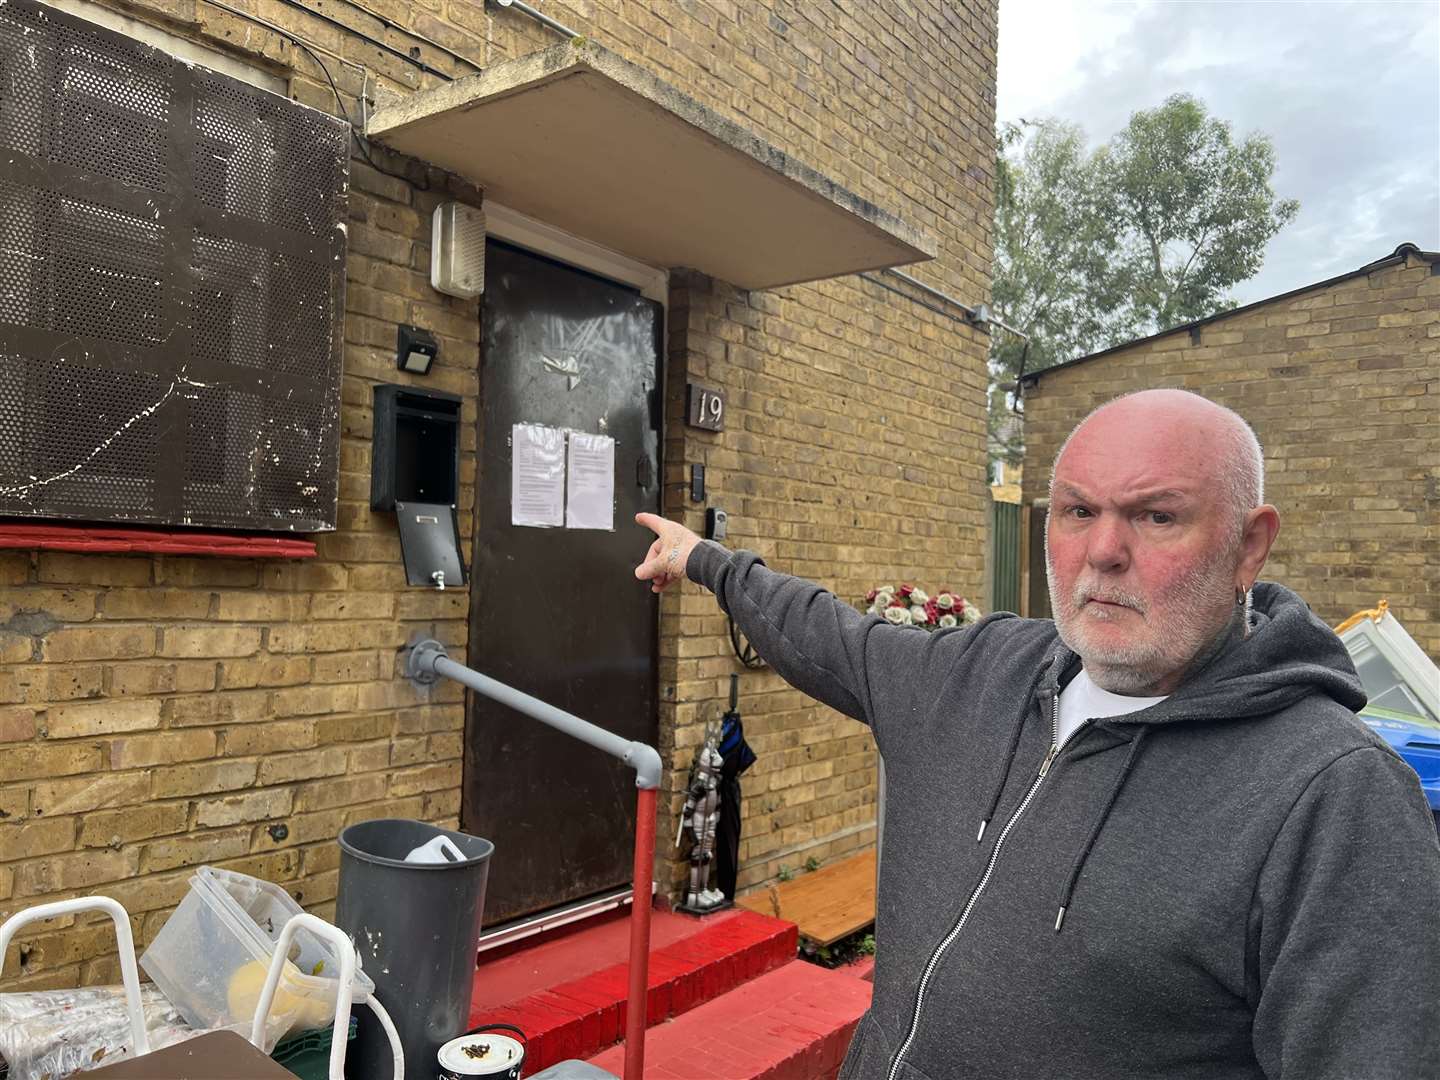 Philip Webb of Oak Road, Murston pointing at the flat that received a closure order from police